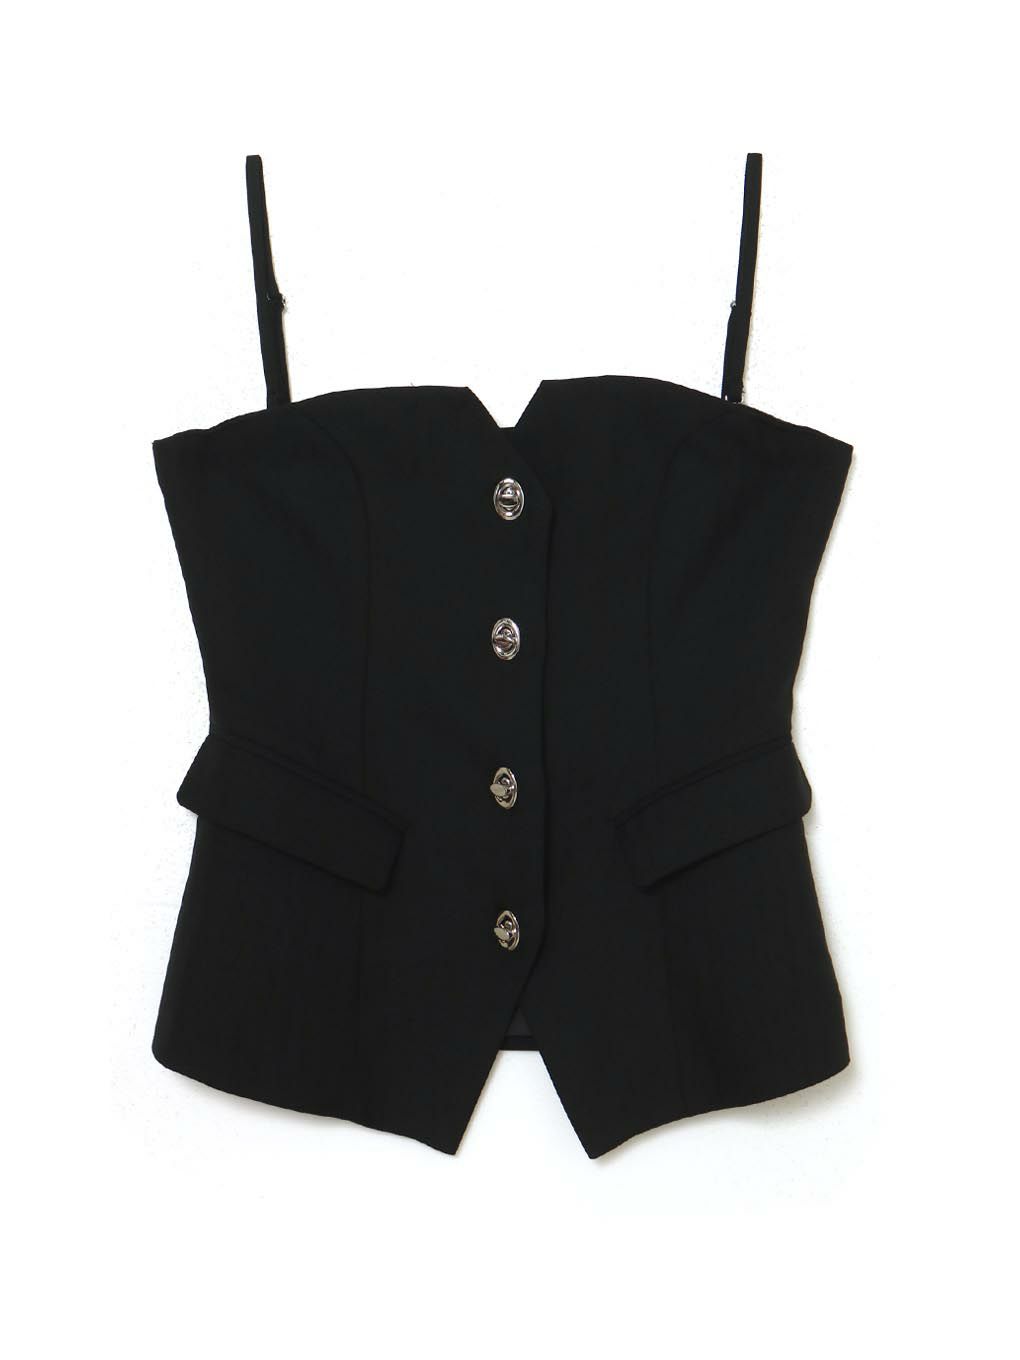 MELT THE LADY cut out bustier-